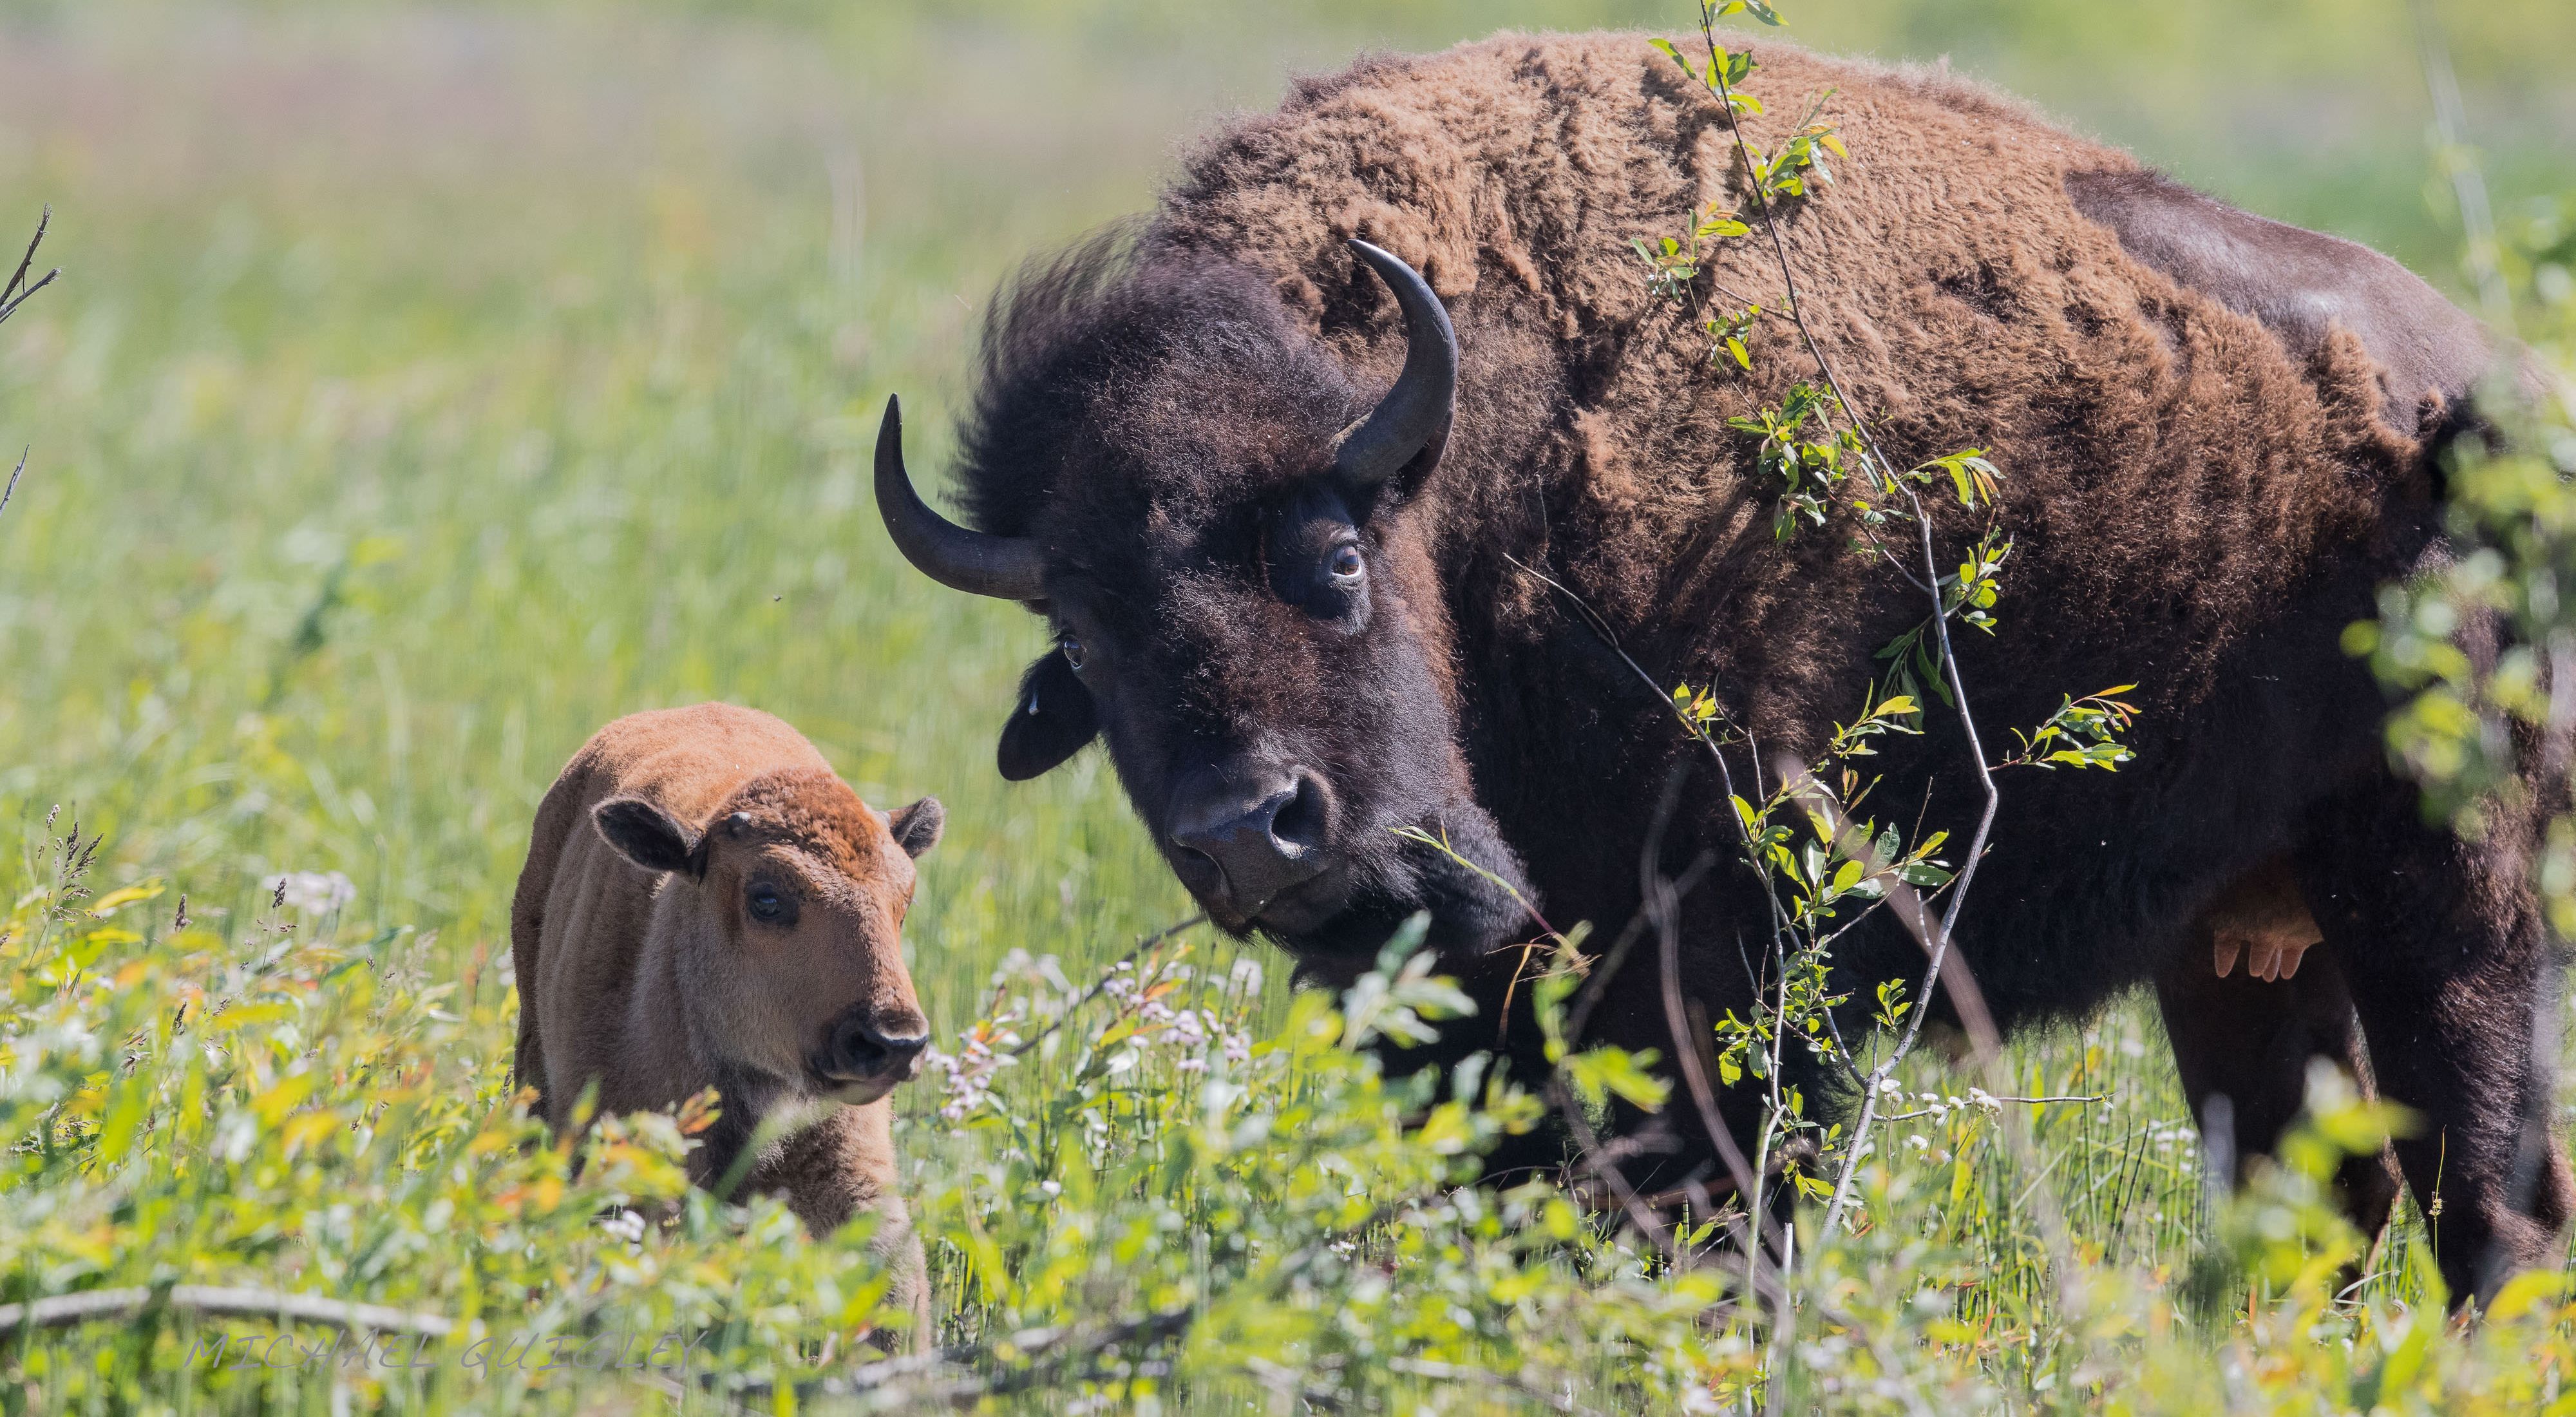 Bison and bison calf in a field.